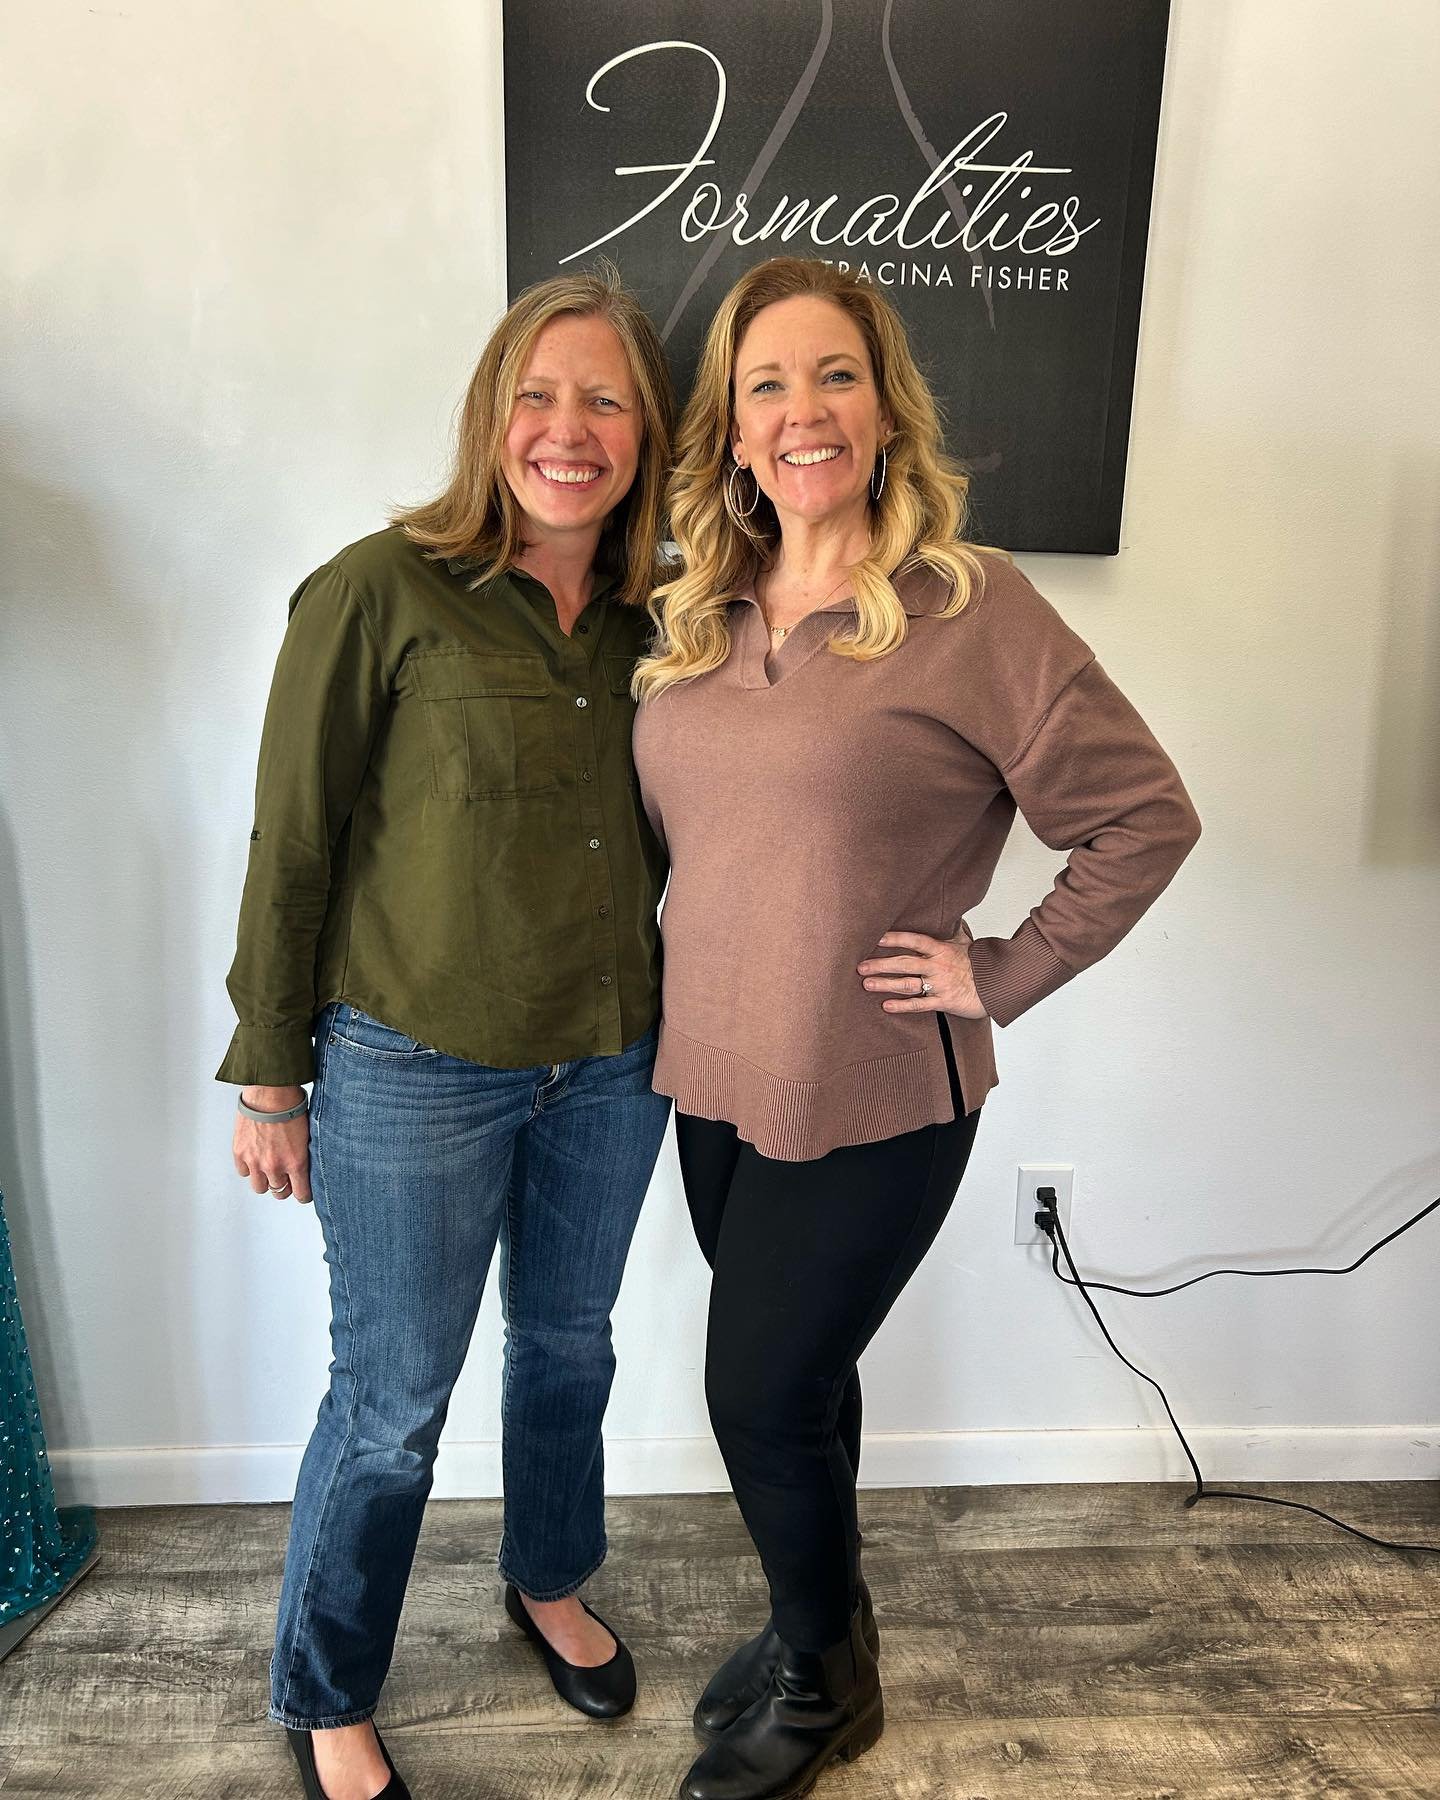 Thank you to Formailities by Tracina Fisher for their donation to the 1st Annual Nennie Scramble taking place on Saturday  April 27th at Nittany Country Club, Mingoville PA. 

Pictured here (left to right): Jillian Walker (Vice President) and Tracina